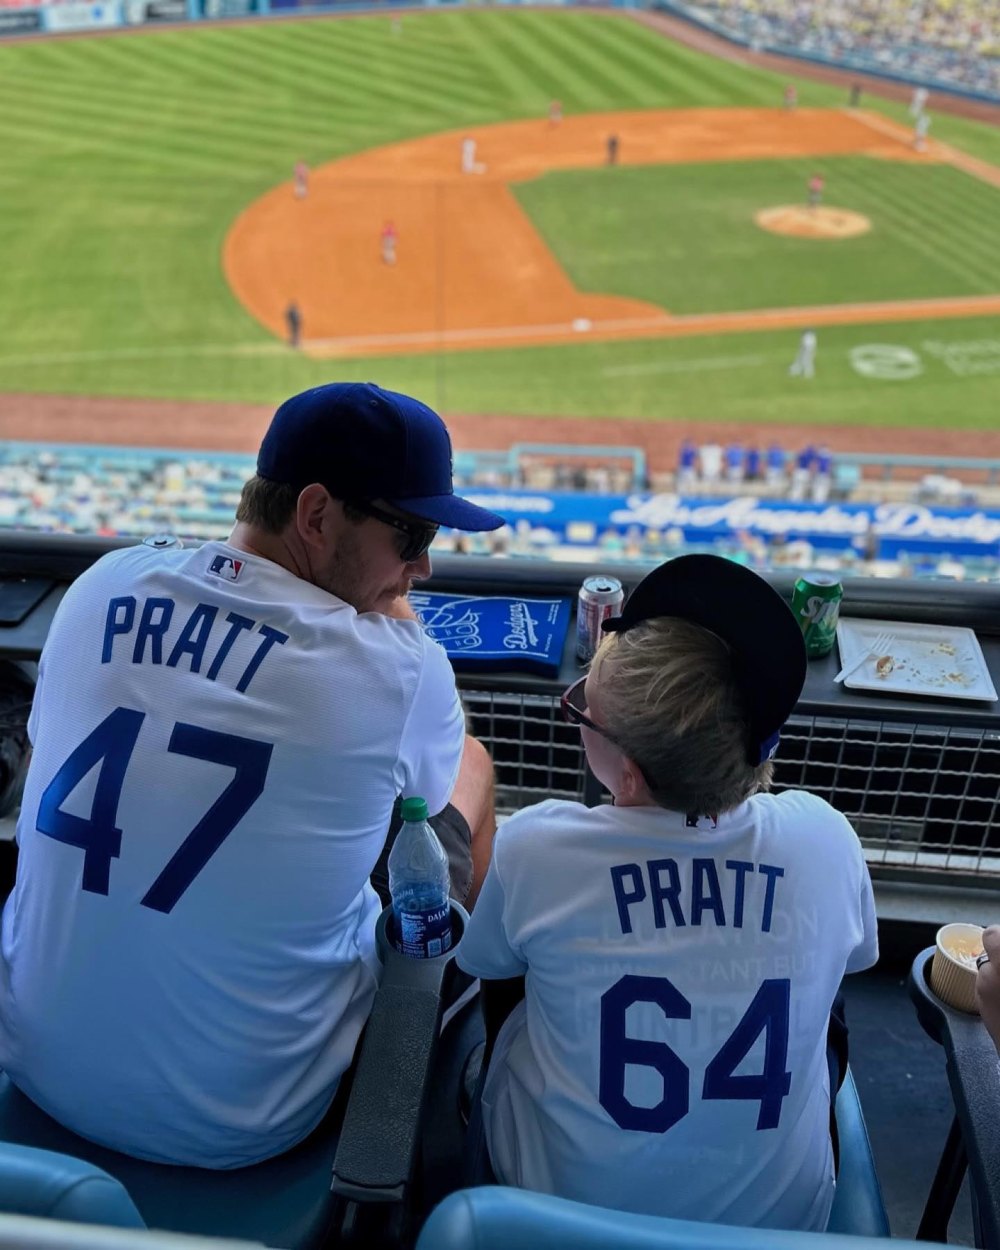 Celebrities At The Los Angeles Dodgers Game - The Knot News